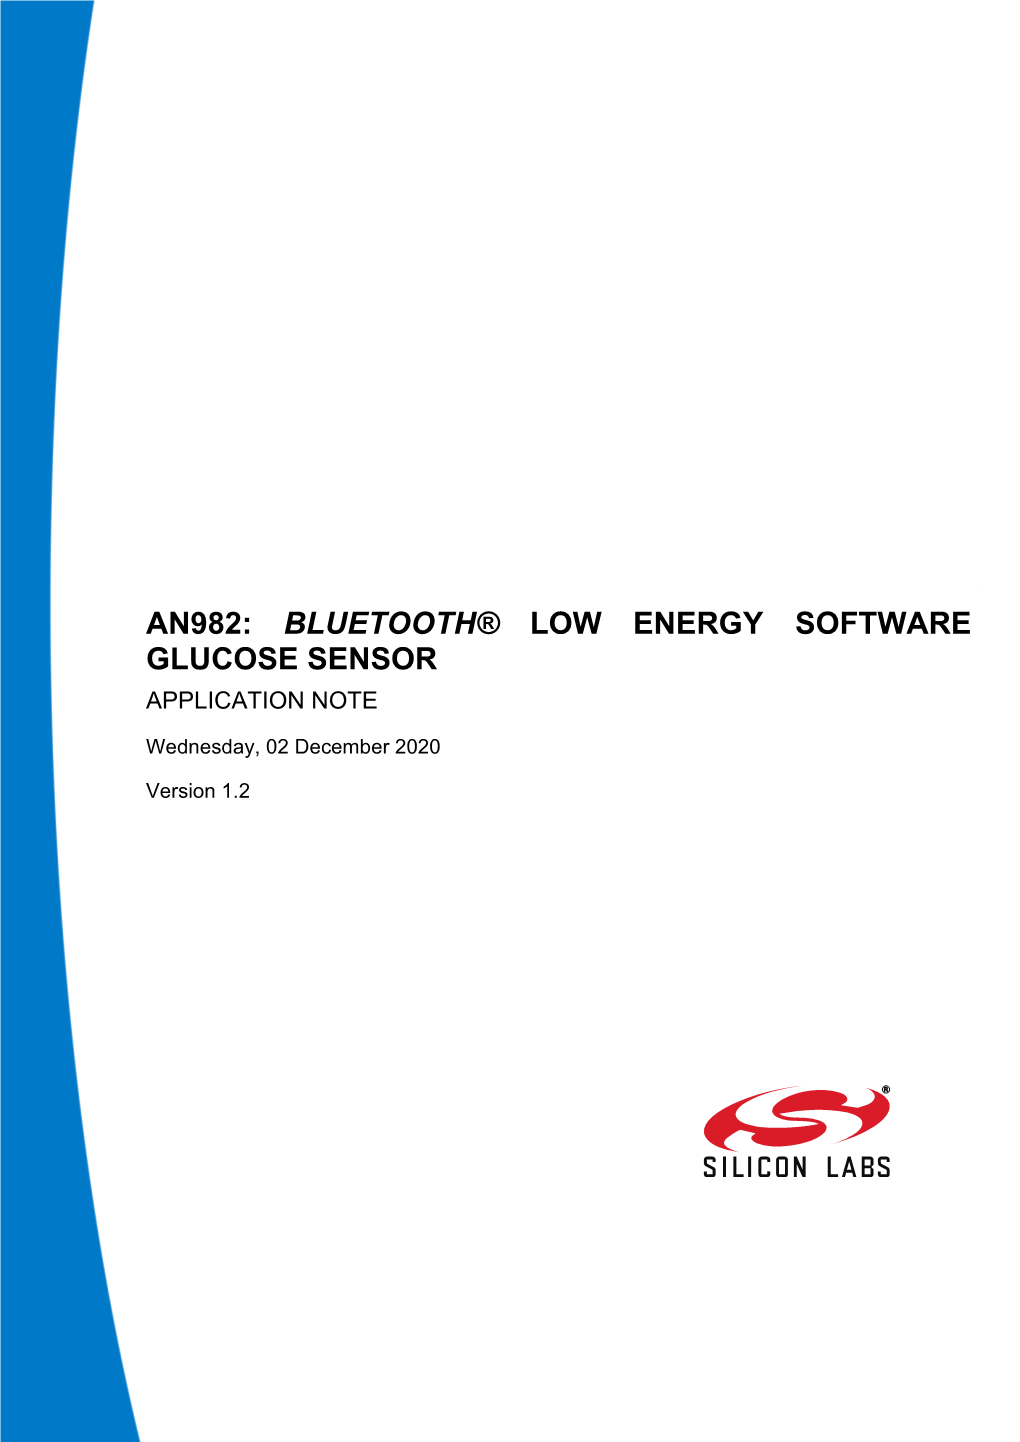 An982: Bluetooth® Low Energy Software Glucose Sensor Application Note